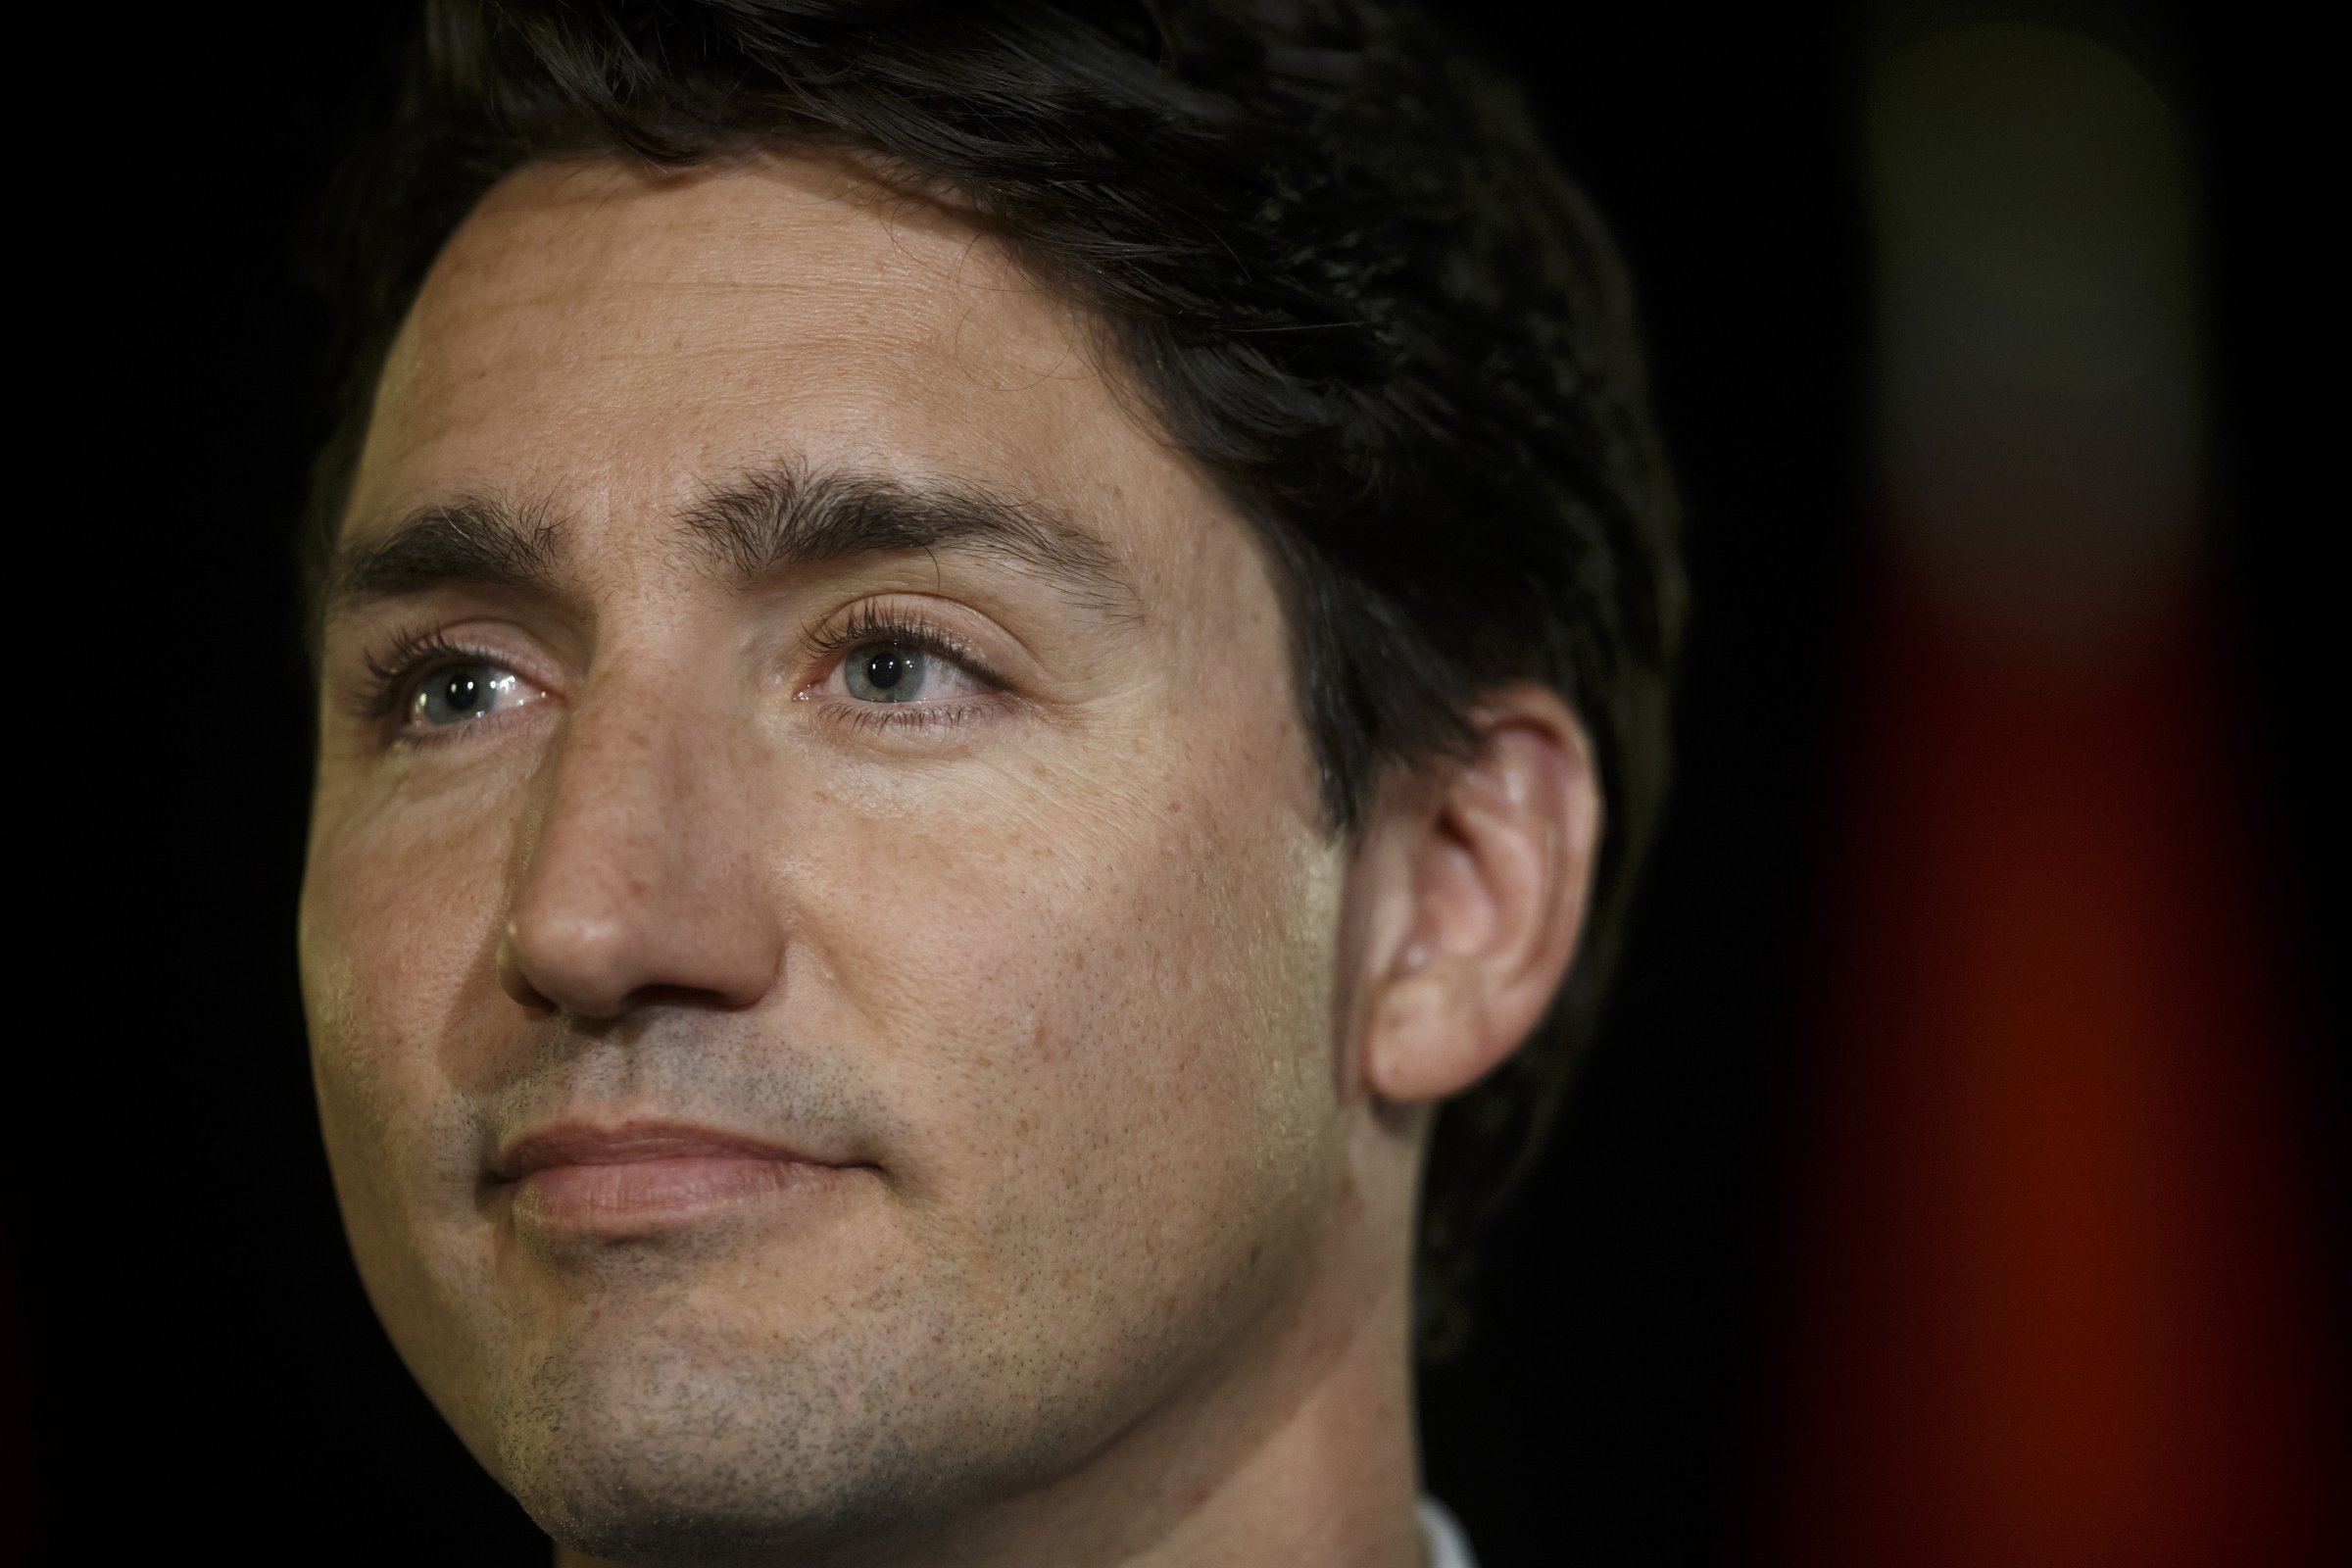 Justin Trudeau, Canada's prime minister, listens during a news conference following a town hall event in Kingston, Ontario, Canada, on Jan. 12, 2017.